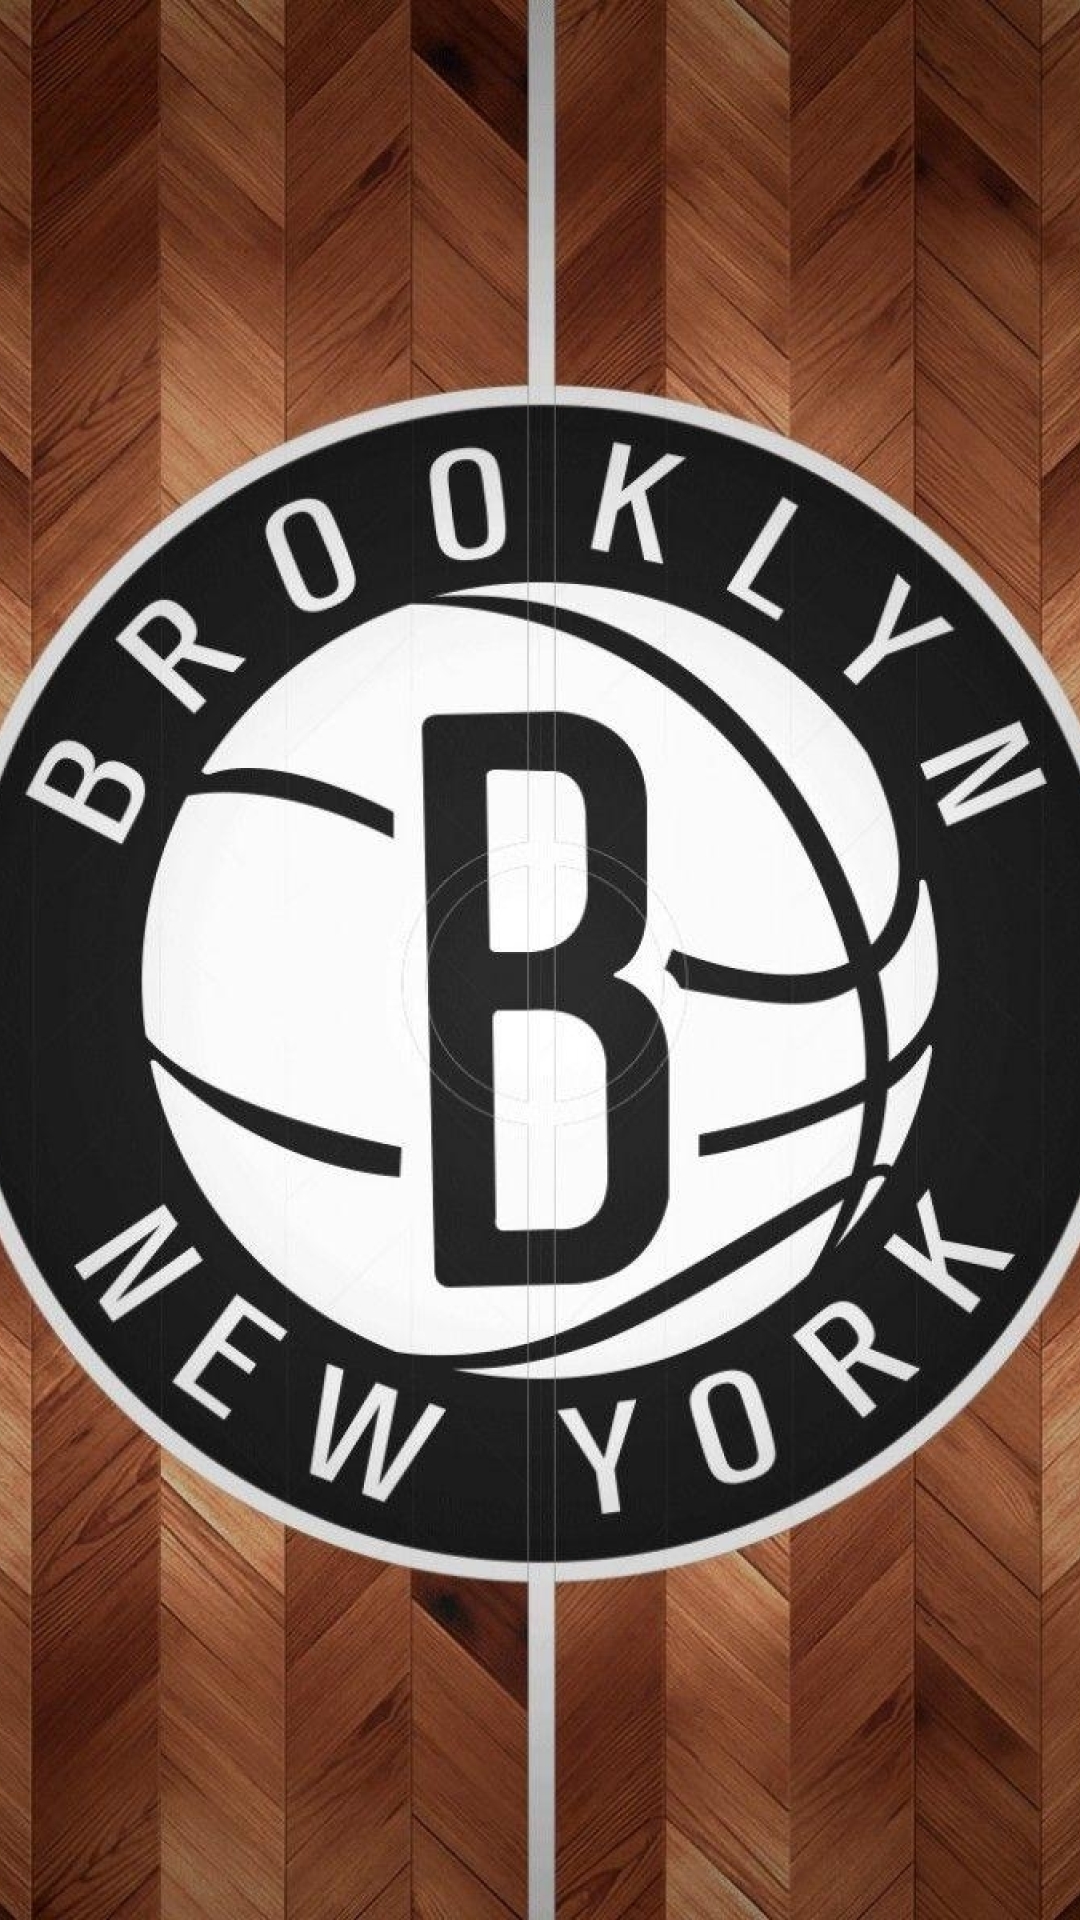 1080x1920 Resolution Logo of Brooklyn Nets NBA Iphone 7, 6s, 6 Plus and  Pixel XL ,One Plus 3, 3t, 5 Wallpaper - Wallpapers Den